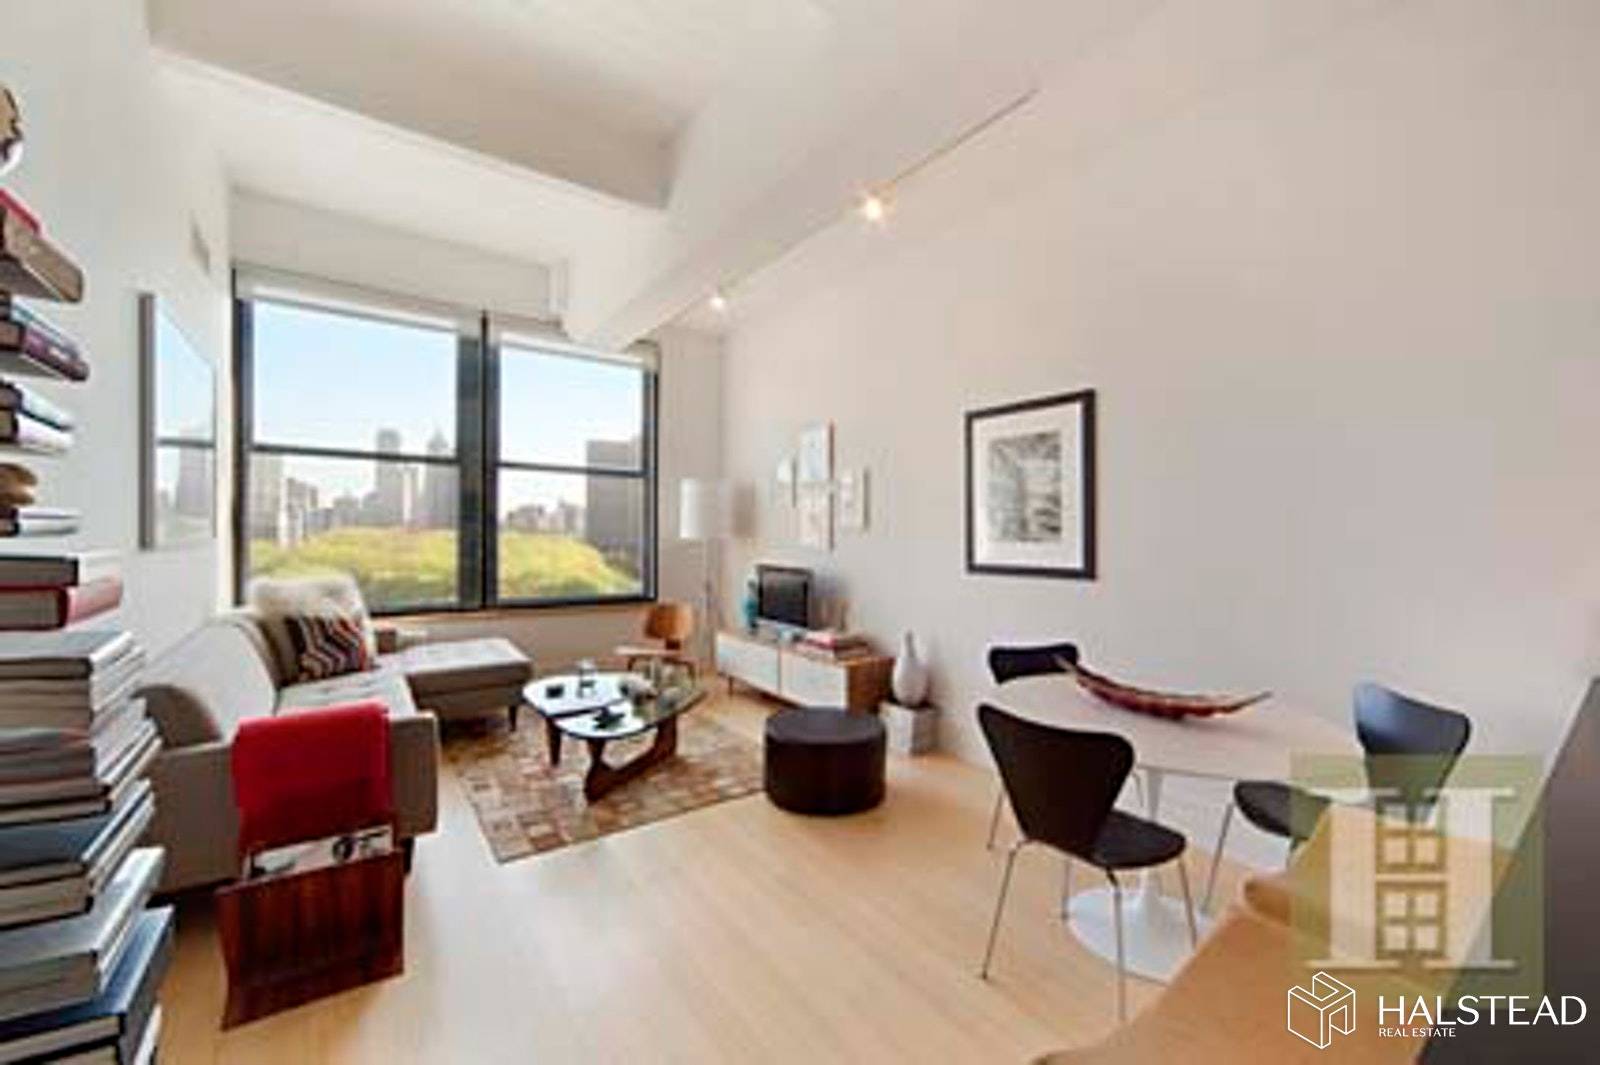 NO BROKER FEE ! Beautiful south facing loft in one of Dumbo's most coveted condominiums.